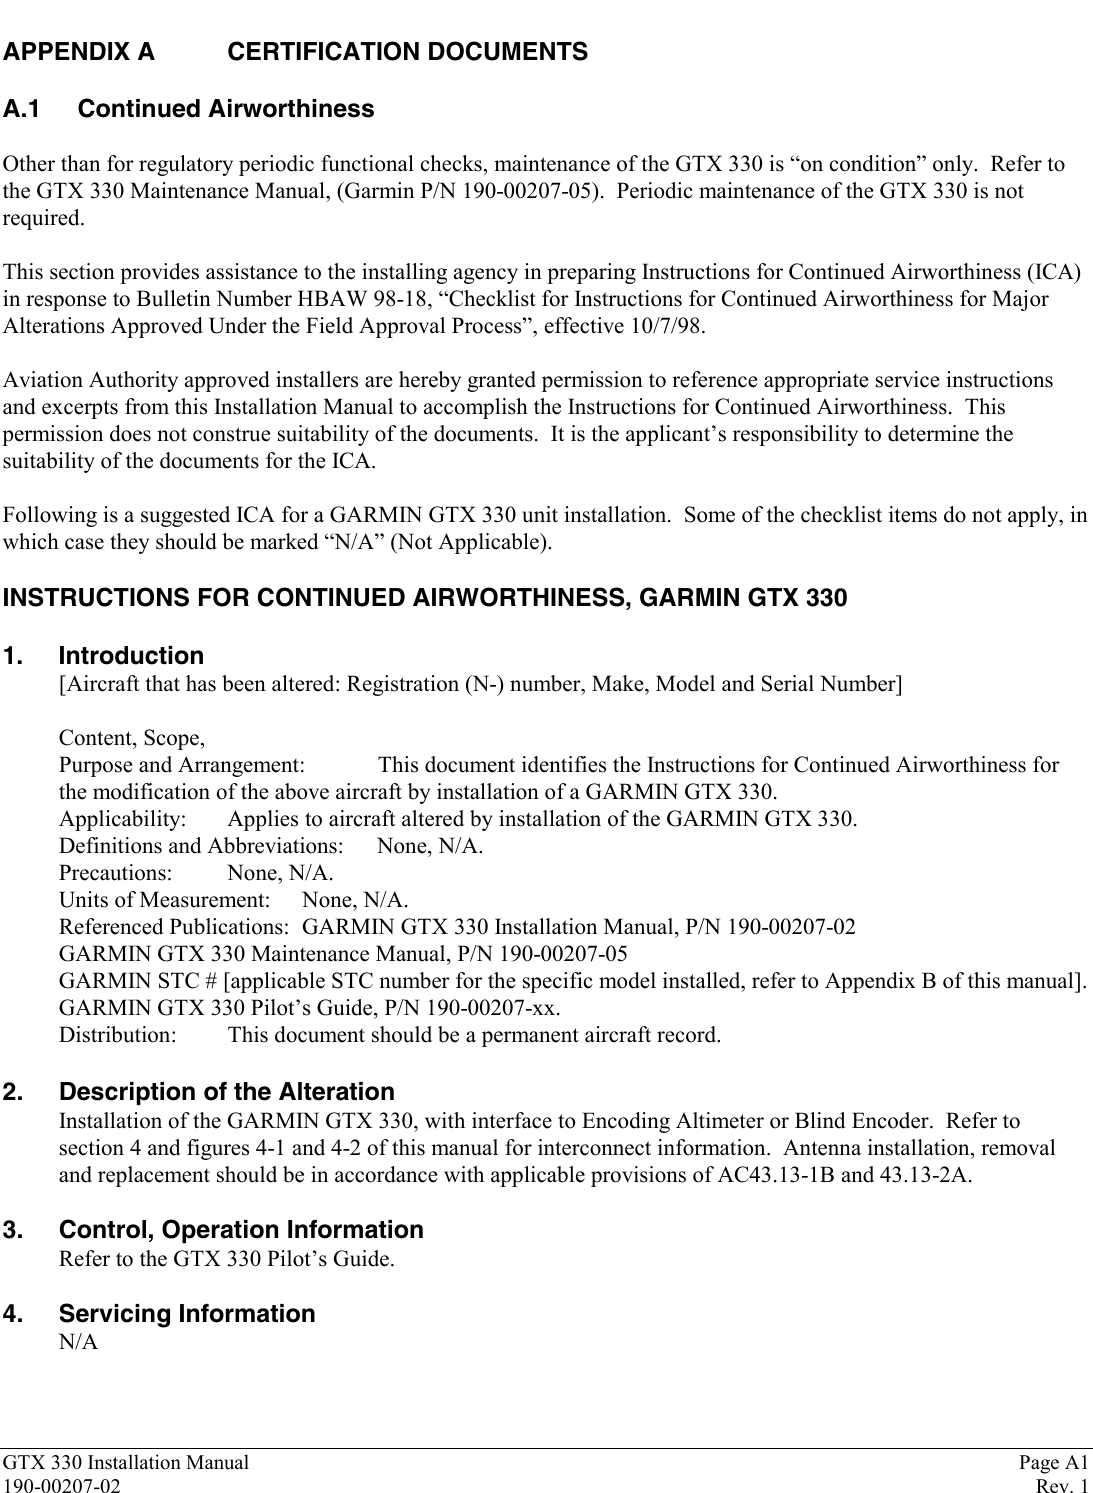 GTX 330 Installation Manual Page A1190-00207-02 Rev. 1APPENDIX A CERTIFICATION DOCUMENTSA.1 Continued AirworthinessOther than for regulatory periodic functional checks, maintenance of the GTX 330 is “on condition” only.  Refer tothe GTX 330 Maintenance Manual, (Garmin P/N 190-00207-05).  Periodic maintenance of the GTX 330 is notrequired.This section provides assistance to the installing agency in preparing Instructions for Continued Airworthiness (ICA)in response to Bulletin Number HBAW 98-18, “Checklist for Instructions for Continued Airworthiness for MajorAlterations Approved Under the Field Approval Process”, effective 10/7/98.Aviation Authority approved installers are hereby granted permission to reference appropriate service instructionsand excerpts from this Installation Manual to accomplish the Instructions for Continued Airworthiness.  Thispermission does not construe suitability of the documents.  It is the applicant’s responsibility to determine thesuitability of the documents for the ICA.Following is a suggested ICA for a GARMIN GTX 330 unit installation.  Some of the checklist items do not apply, inwhich case they should be marked “N/A” (Not Applicable).INSTRUCTIONS FOR CONTINUED AIRWORTHINESS, GARMIN GTX 3301. Introduction[Aircraft that has been altered: Registration (N-) number, Make, Model and Serial Number]Content, Scope,Purpose and Arrangement: This document identifies the Instructions for Continued Airworthiness forthe modification of the above aircraft by installation of a GARMIN GTX 330.Applicability: Applies to aircraft altered by installation of the GARMIN GTX 330.Definitions and Abbreviations: None, N/A.Precautions: None, N/A.Units of Measurement: None, N/A.Referenced Publications: GARMIN GTX 330 Installation Manual, P/N 190-00207-02GARMIN GTX 330 Maintenance Manual, P/N 190-00207-05GARMIN STC # [applicable STC number for the specific model installed, refer to Appendix B of this manual].GARMIN GTX 330 Pilot’s Guide, P/N 190-00207-xx.Distribution: This document should be a permanent aircraft record.2. Description of the AlterationInstallation of the GARMIN GTX 330, with interface to Encoding Altimeter or Blind Encoder.  Refer tosection 4 and figures 4-1 and 4-2 of this manual for interconnect information.  Antenna installation, removaland replacement should be in accordance with applicable provisions of AC43.13-1B and 43.13-2A.3. Control, Operation InformationRefer to the GTX 330 Pilot’s Guide.4. Servicing InformationN/A